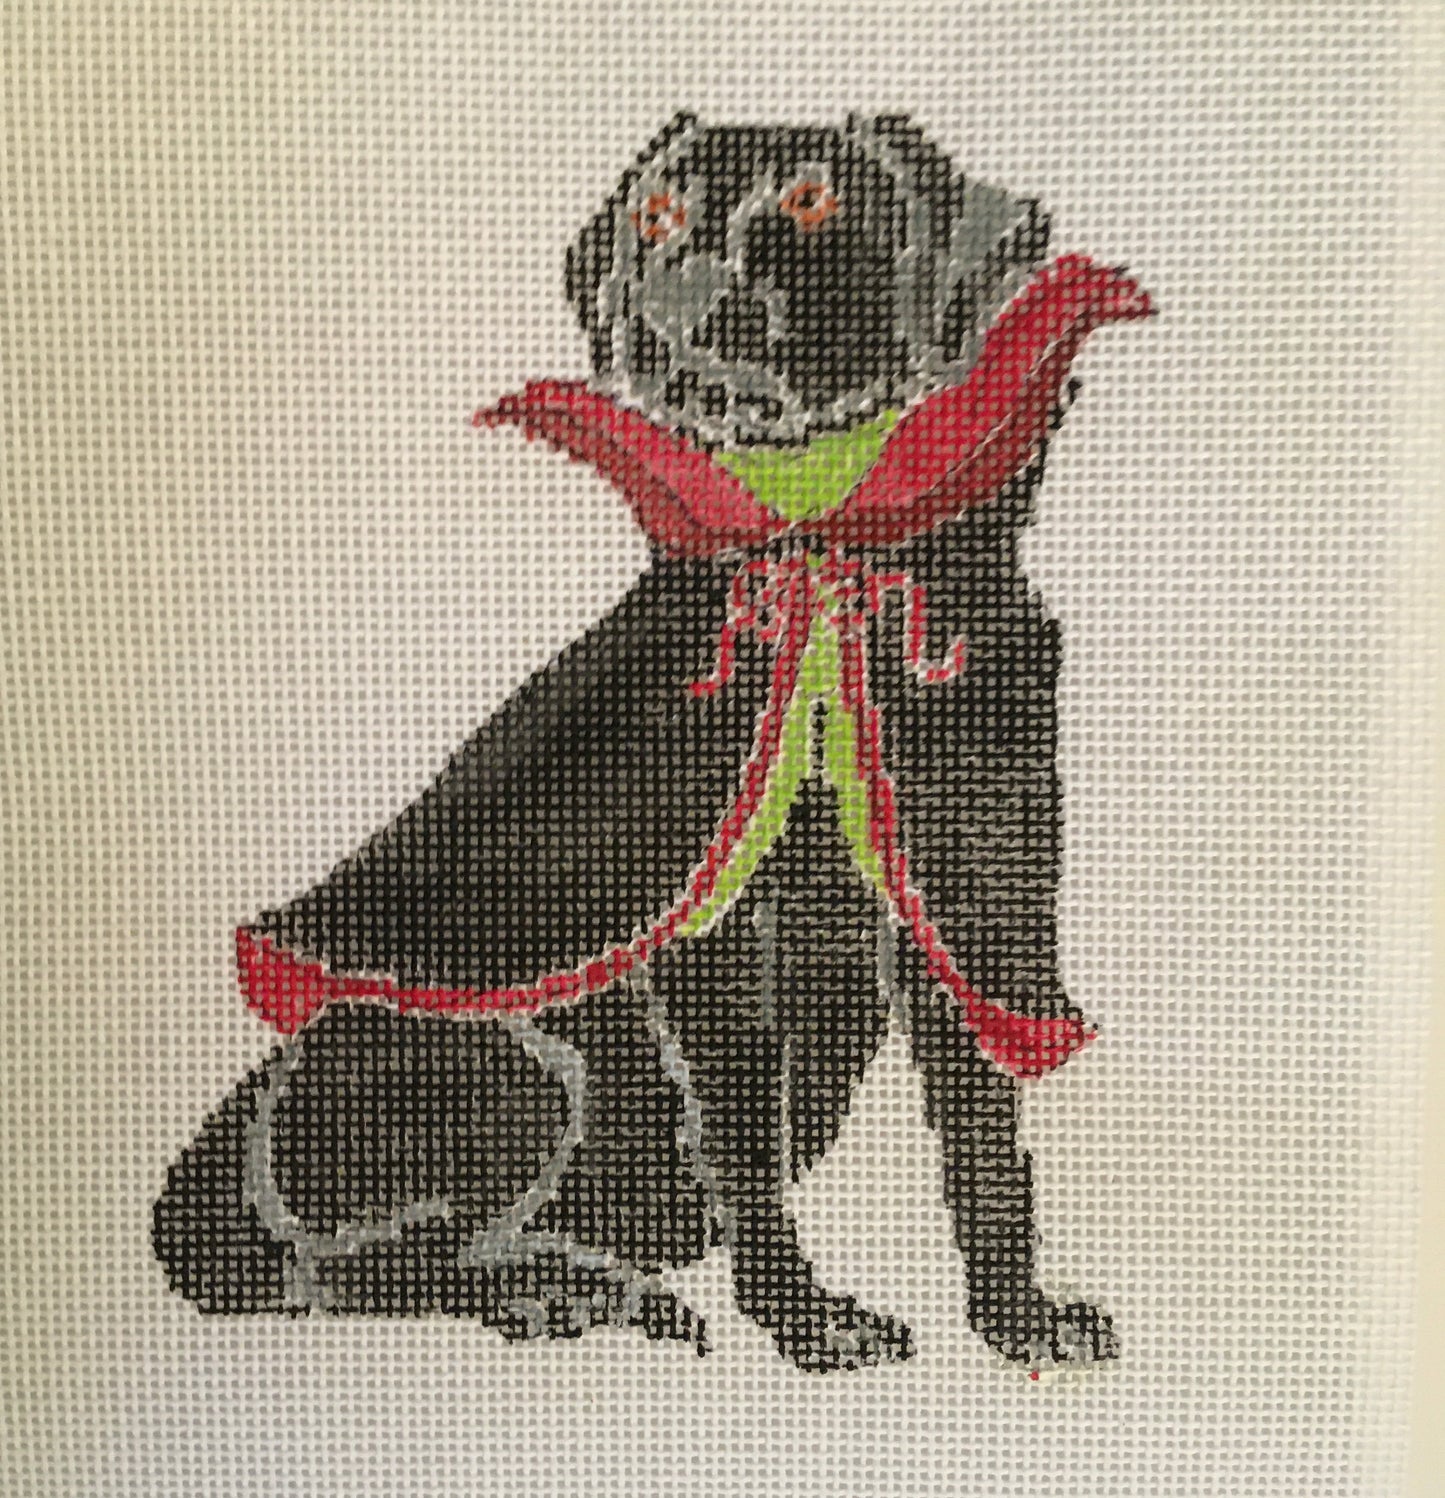 #10 October dog with stitch guide